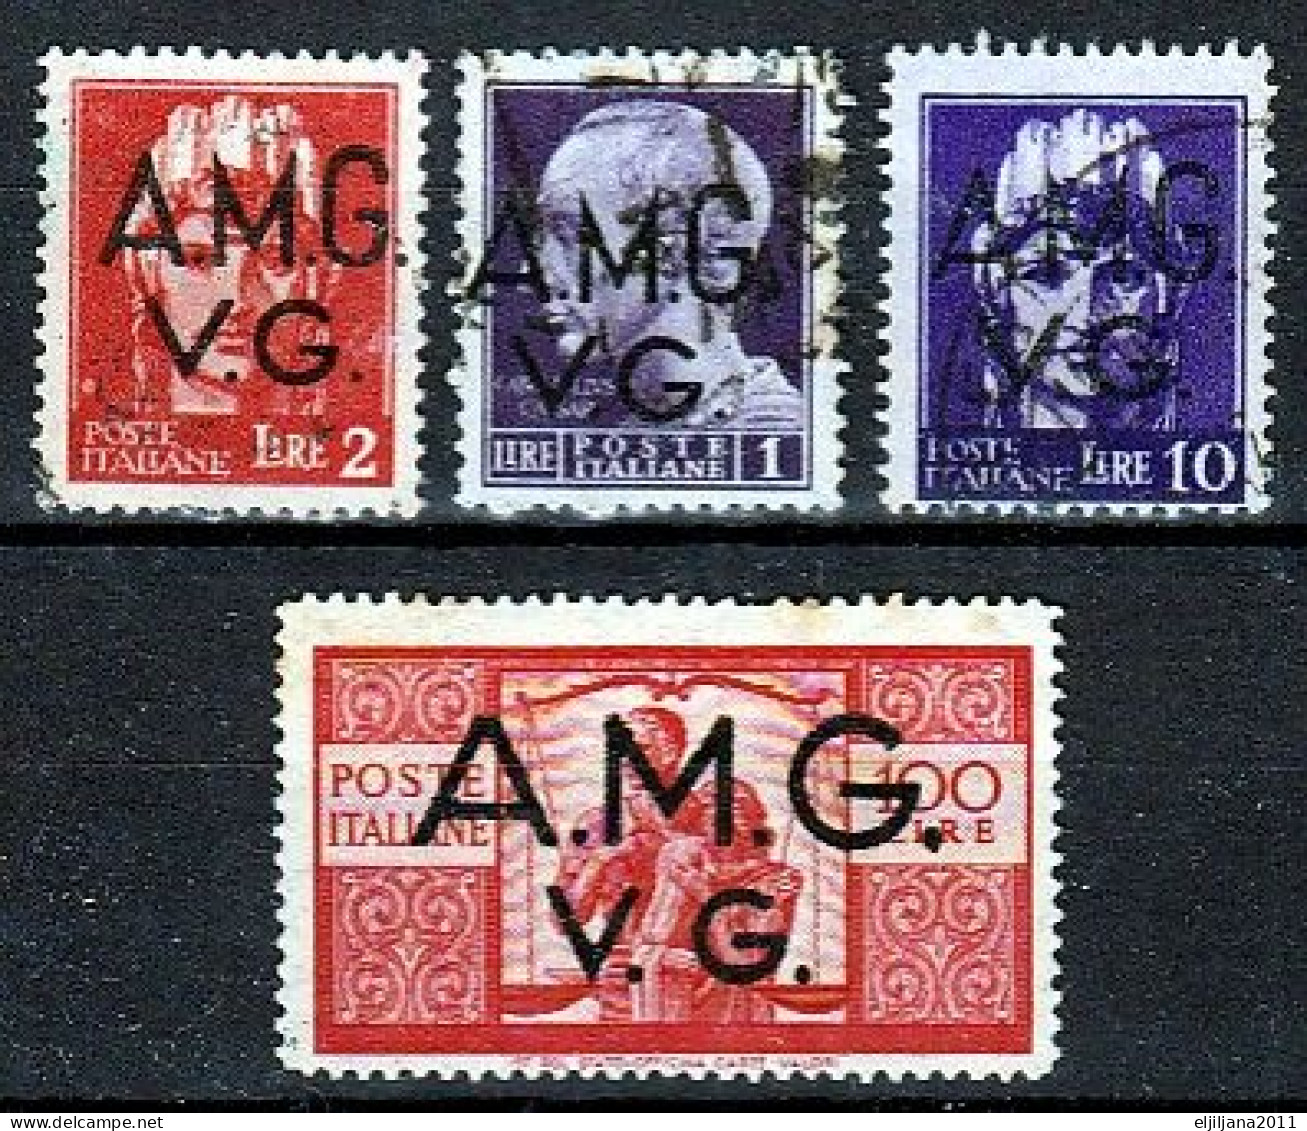 Action !! SALE !! 50 % OFF !! ⁕ Italy - TRIESTE 1945 ⁕ AMG VG Overprint ⁕ 4v Used - Usati